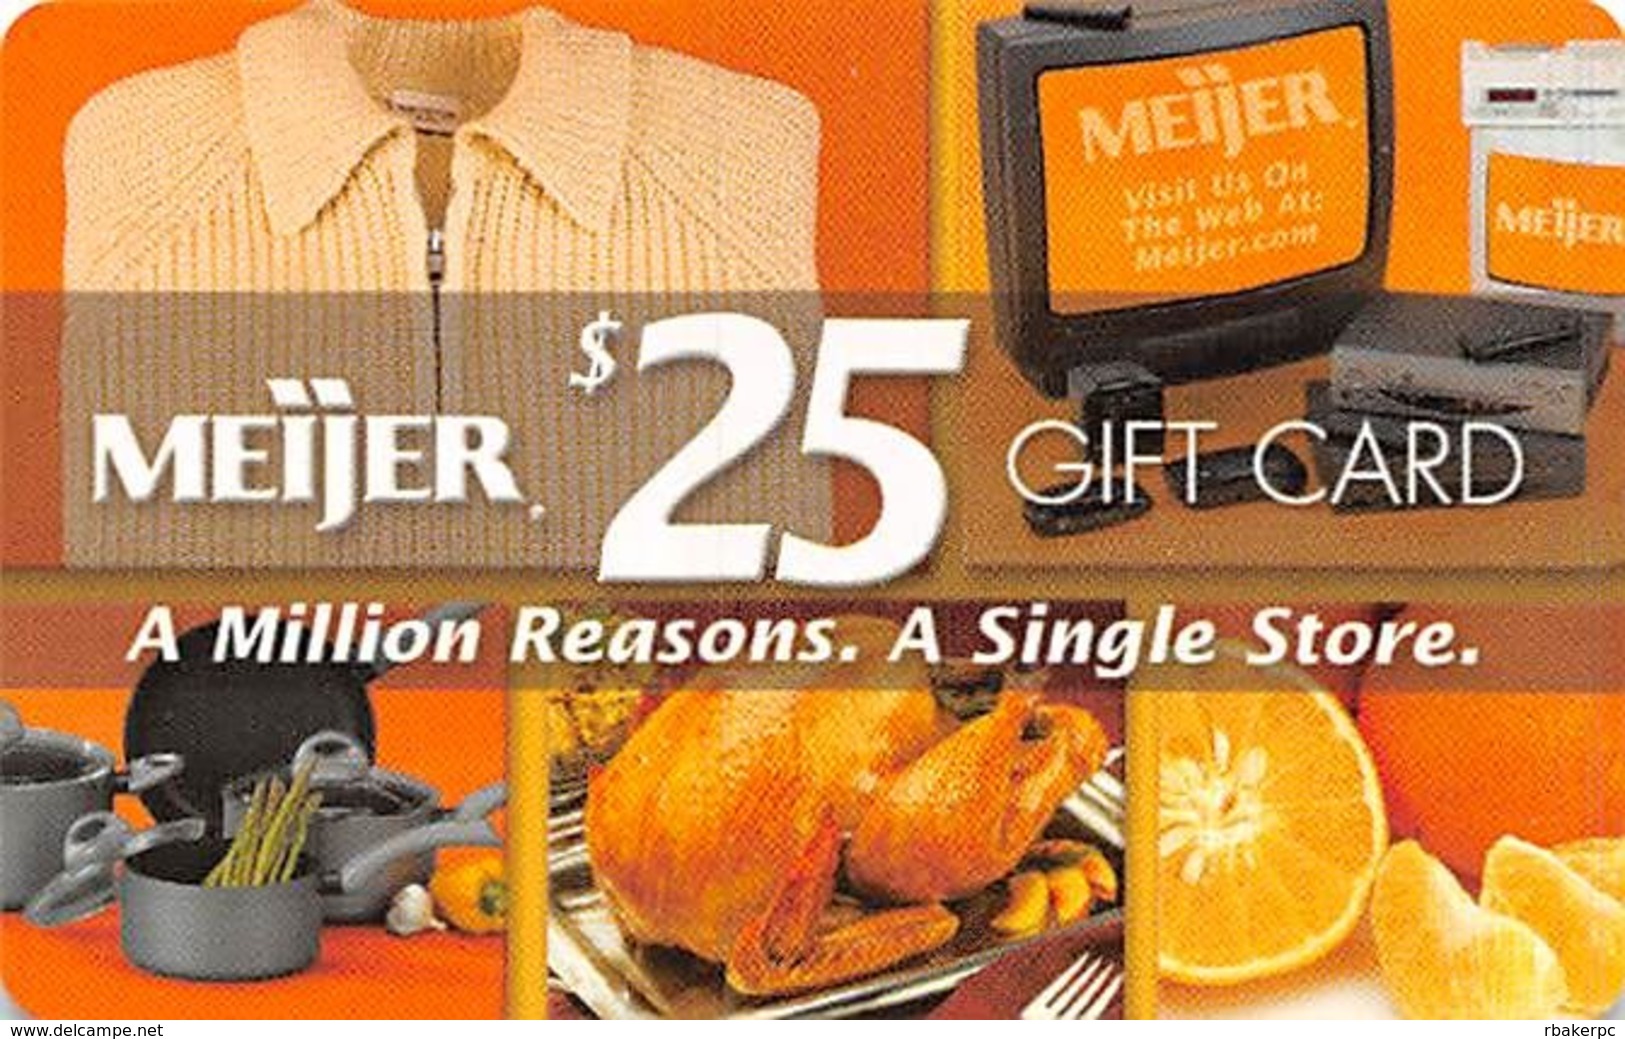 Meijer Gift Card - Gift Cards